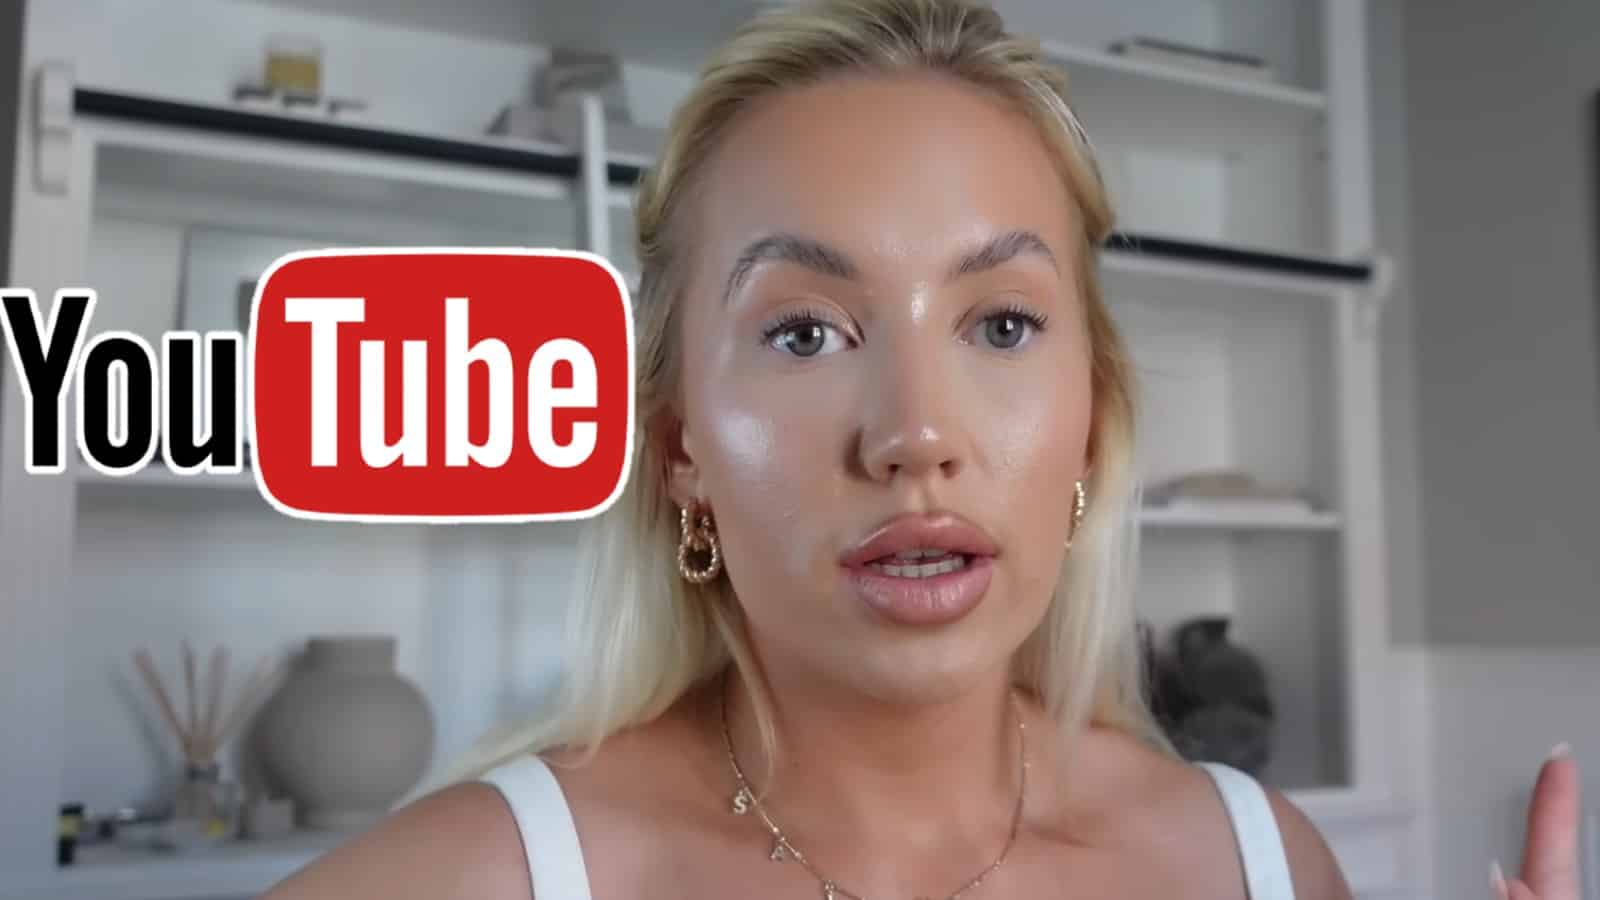 Elle Darby apology video with YouTube logo